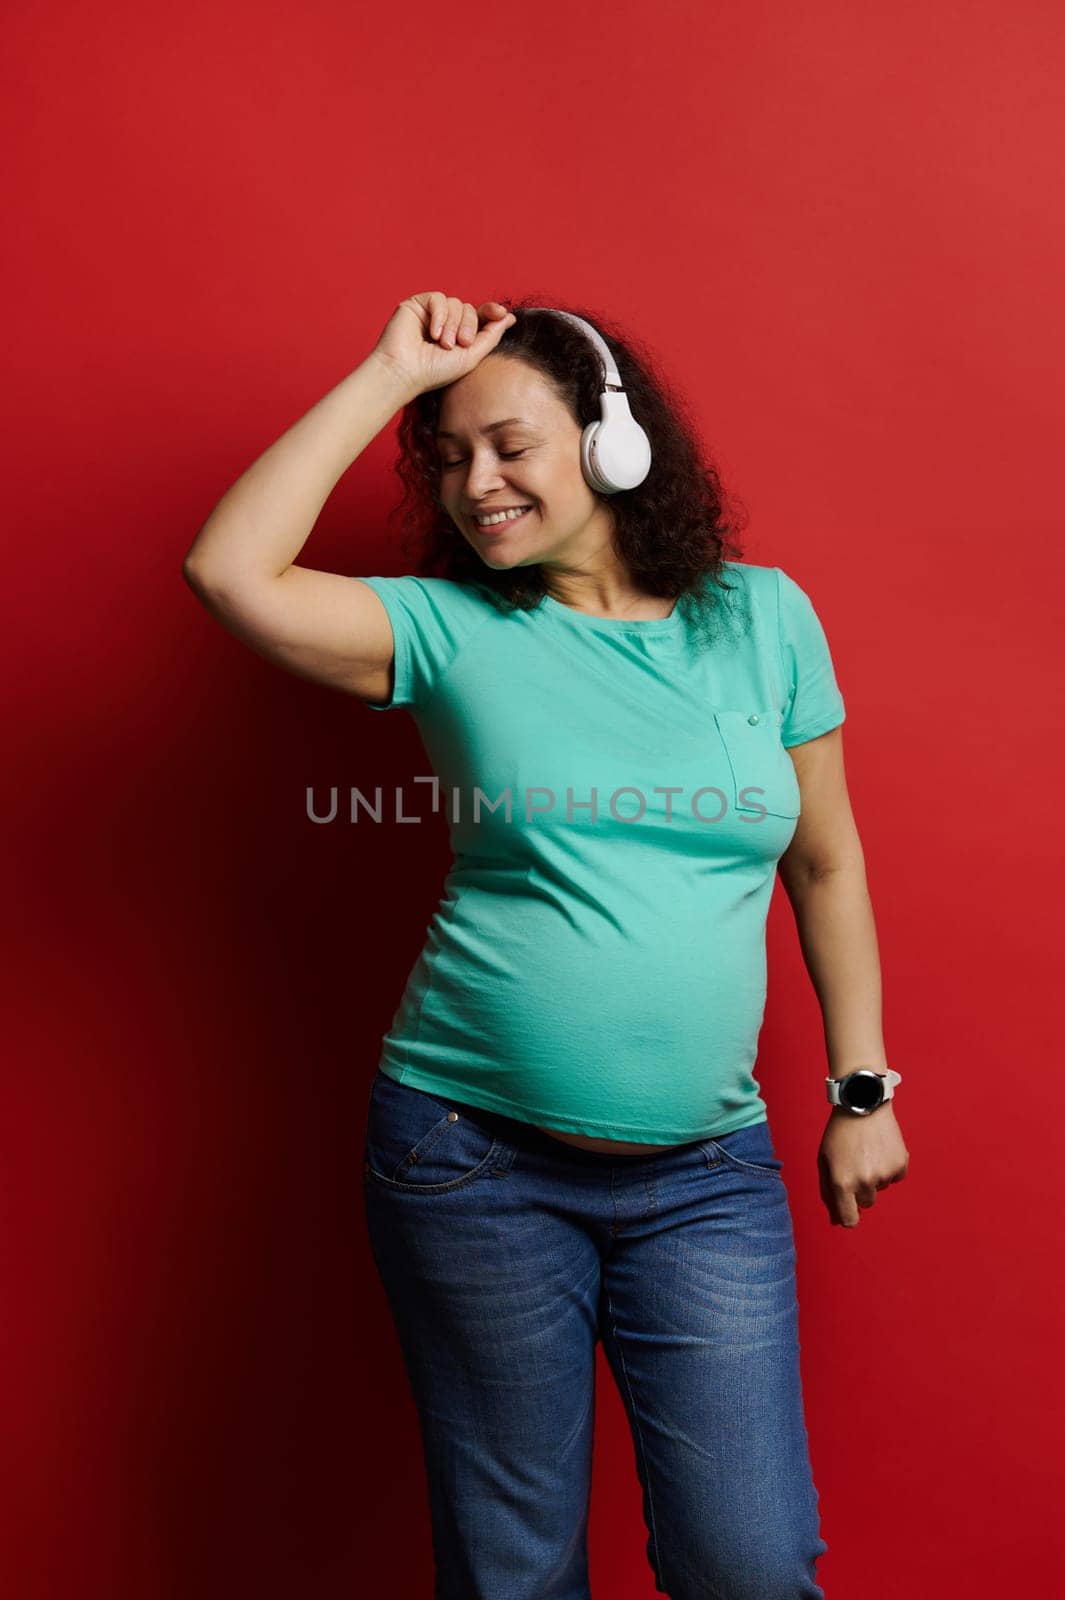 Adult pregnant woman dancing listening to music on headphones, enjoying wonderful moments of happy carefree pregnancy by artgf